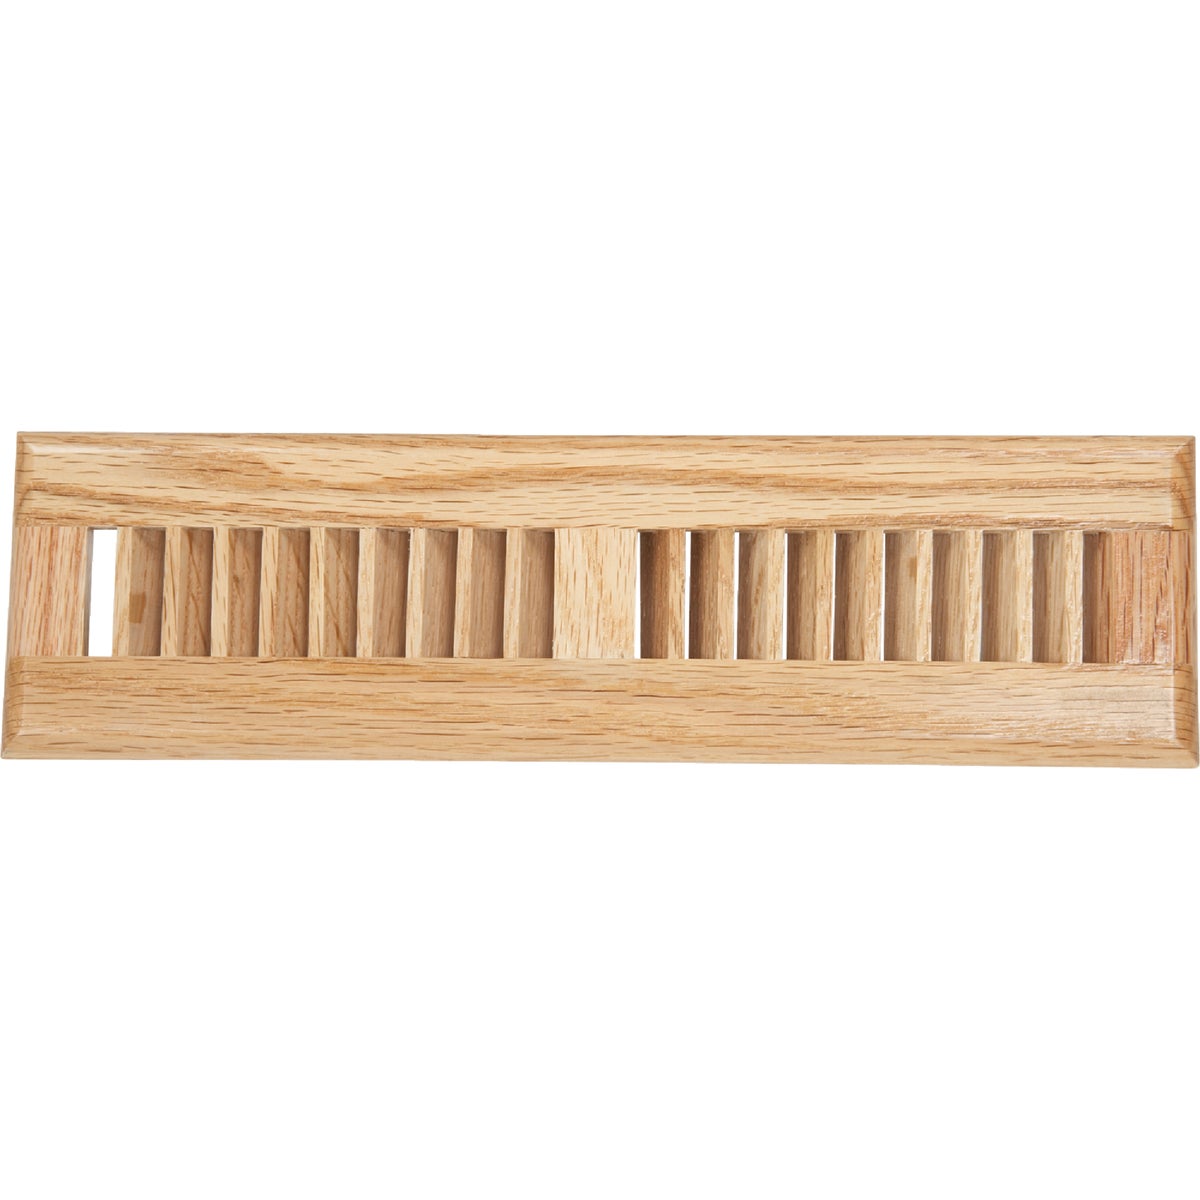 Item 463884, These prefinished light oak contemporary hardwood floor registers are 